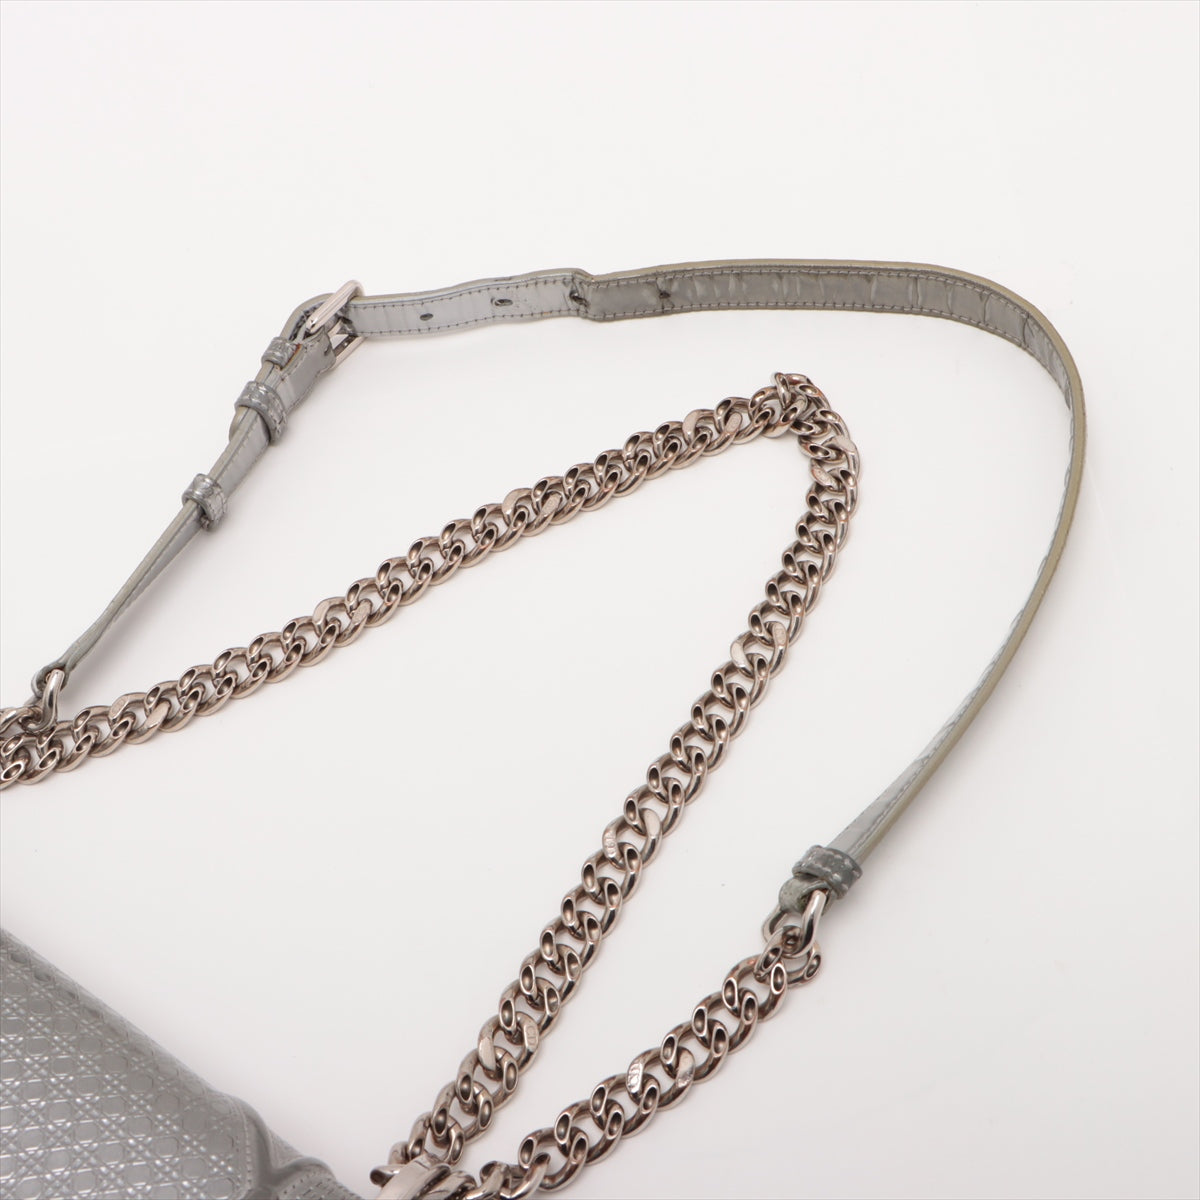 Christian Dior Diorama Patent leather Chain shoulder bag Silver